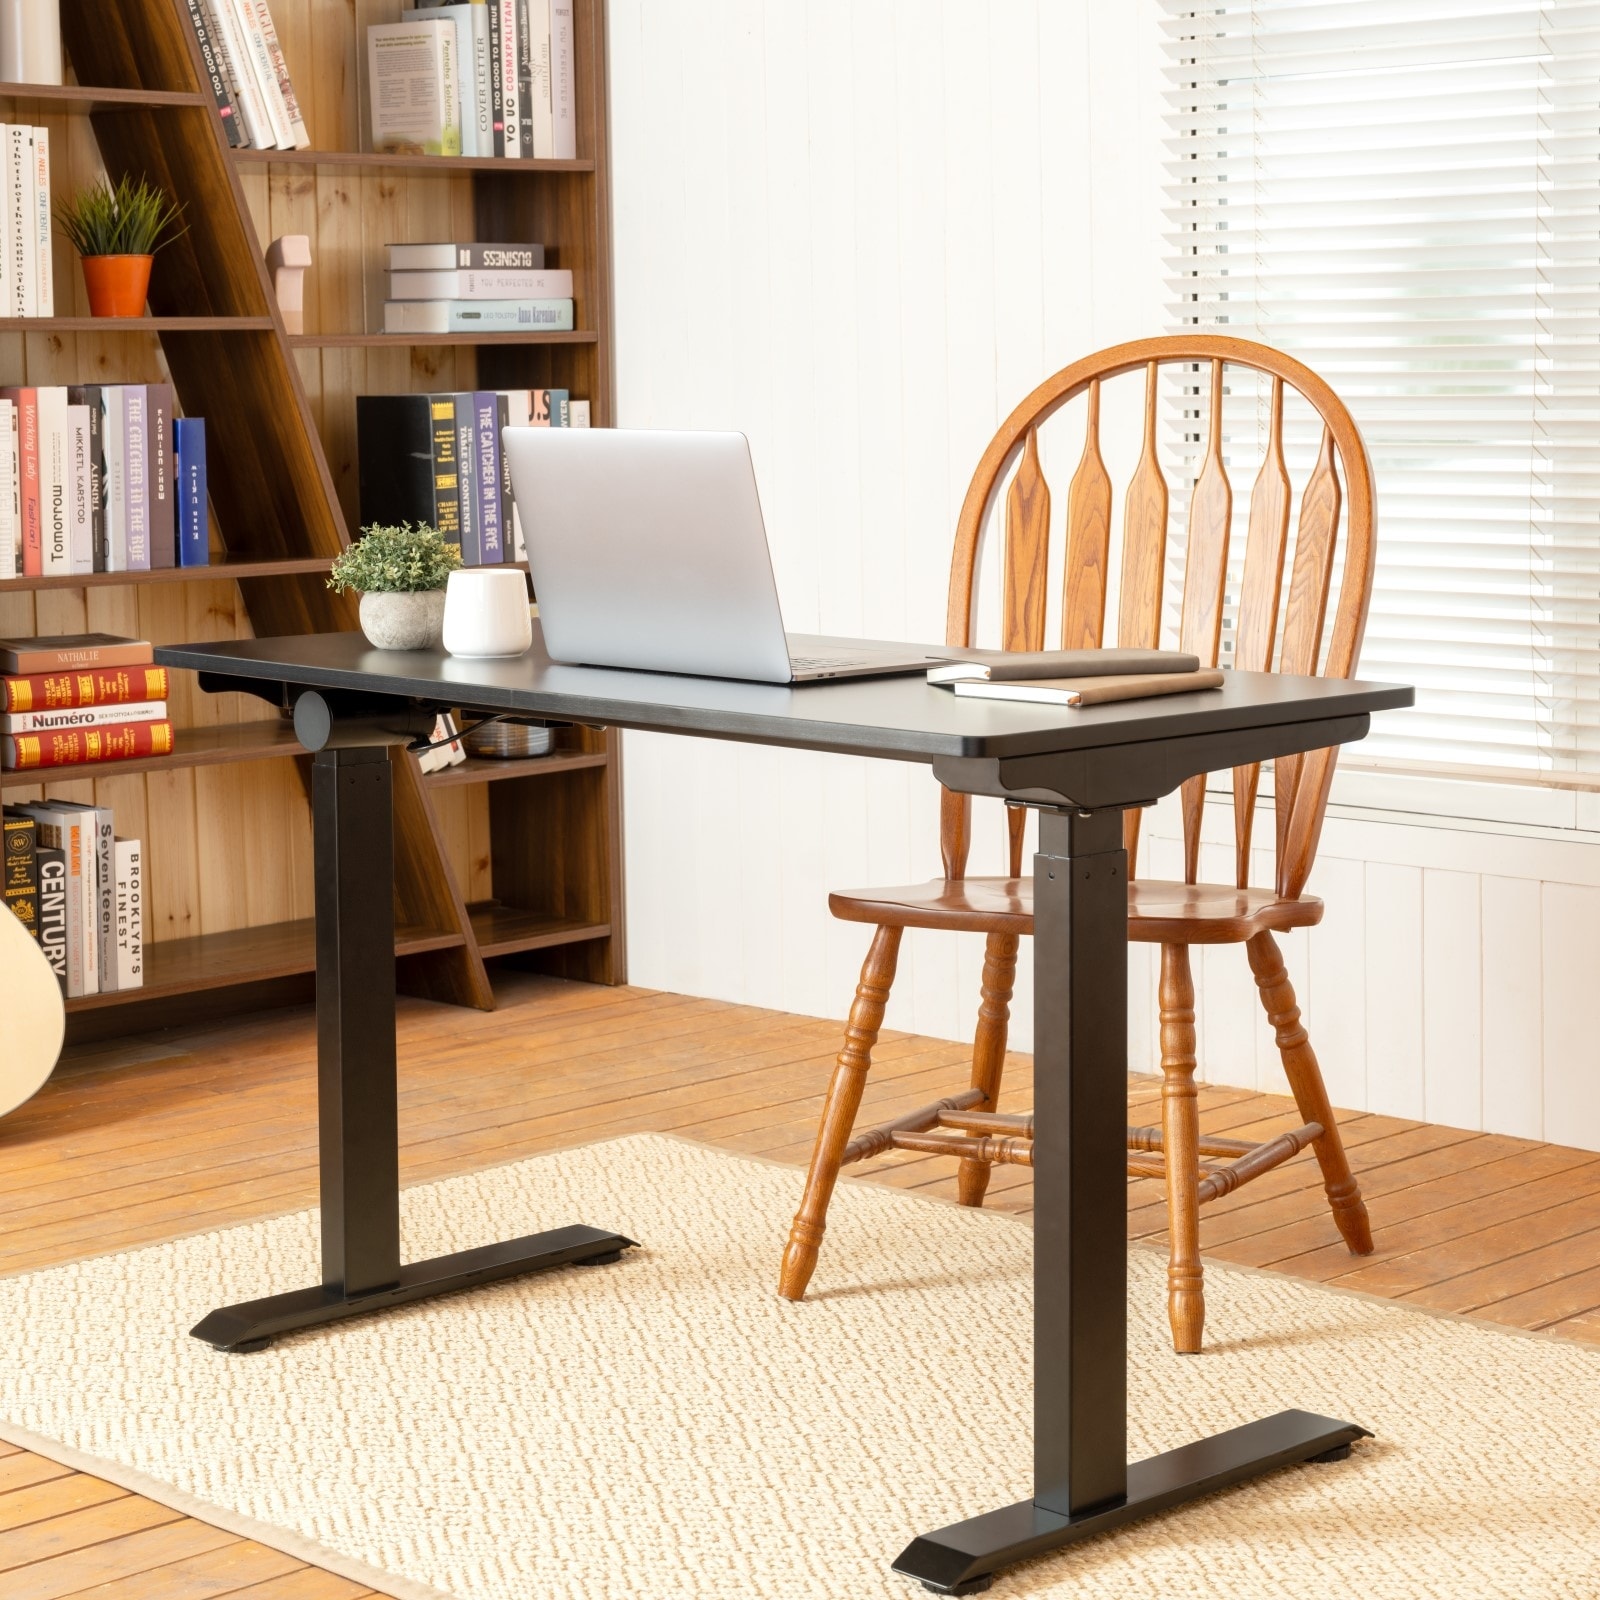 FLEXISPOT Standing Desk 48 x 30 Inches Height Adjustable Electric Sit Stand  Home Office Desks Whole Piece Desk Board (Black Frame + Black top,2